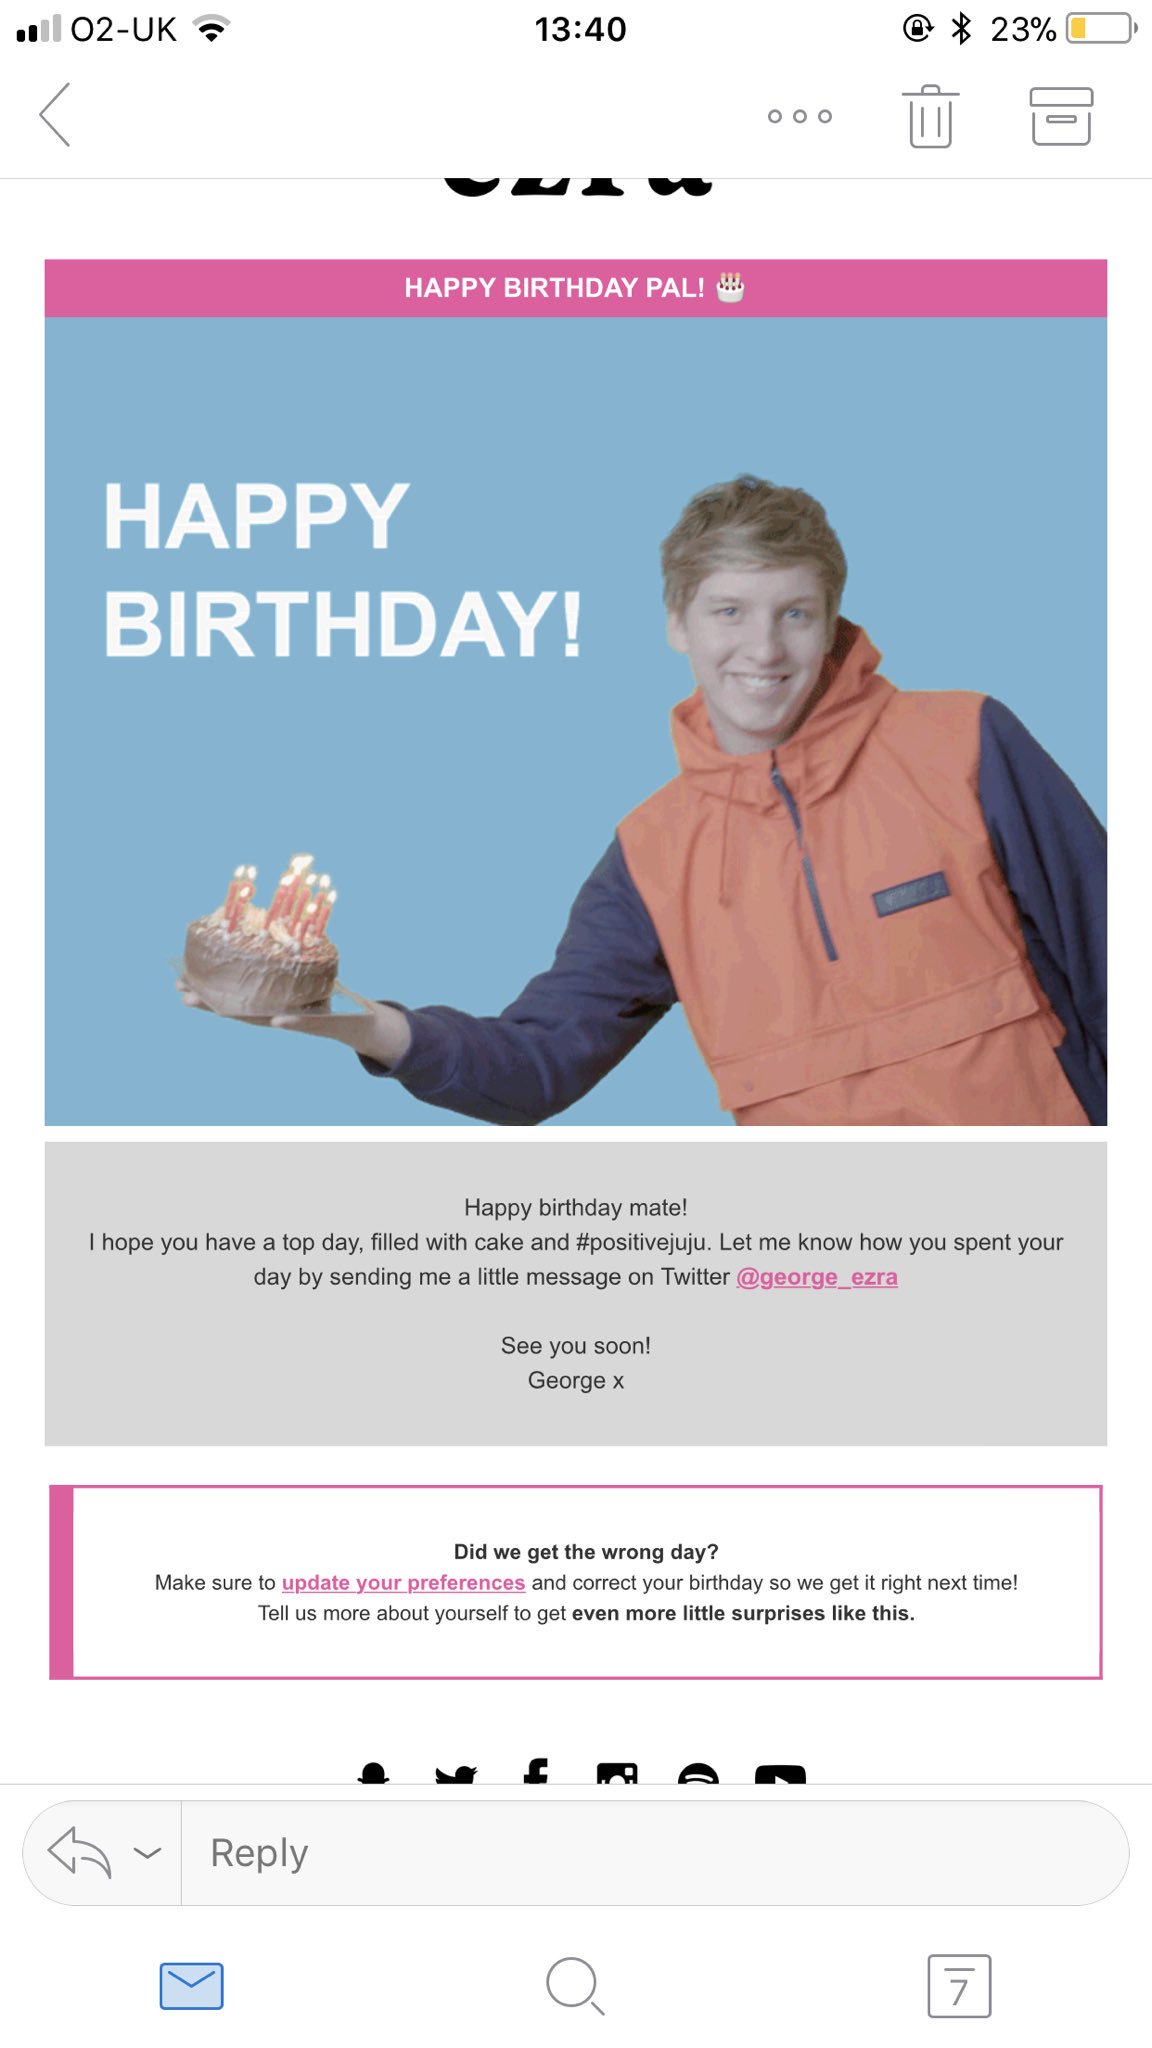 Ayyy loved seeing this in my inbox today! Happy birthday to you too! 